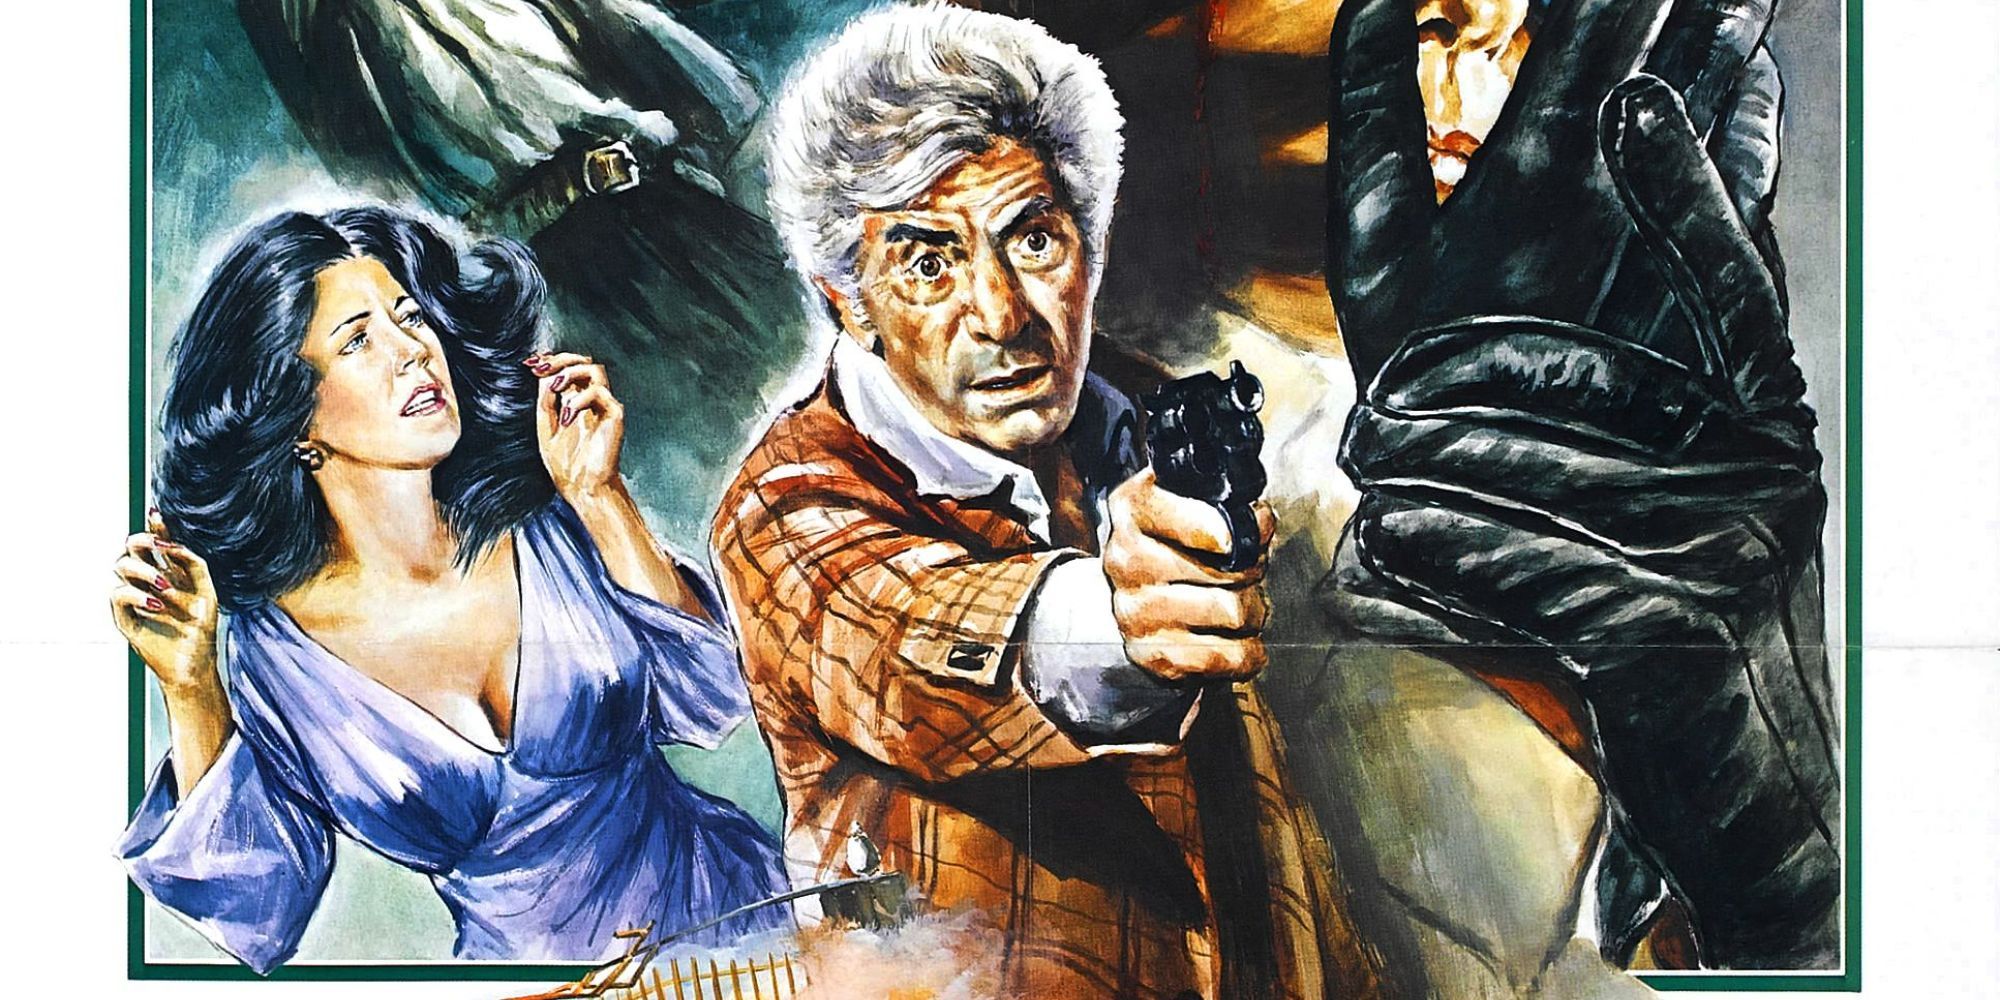 The theatrical poster for Deathdream featuring a man aiming a pistol